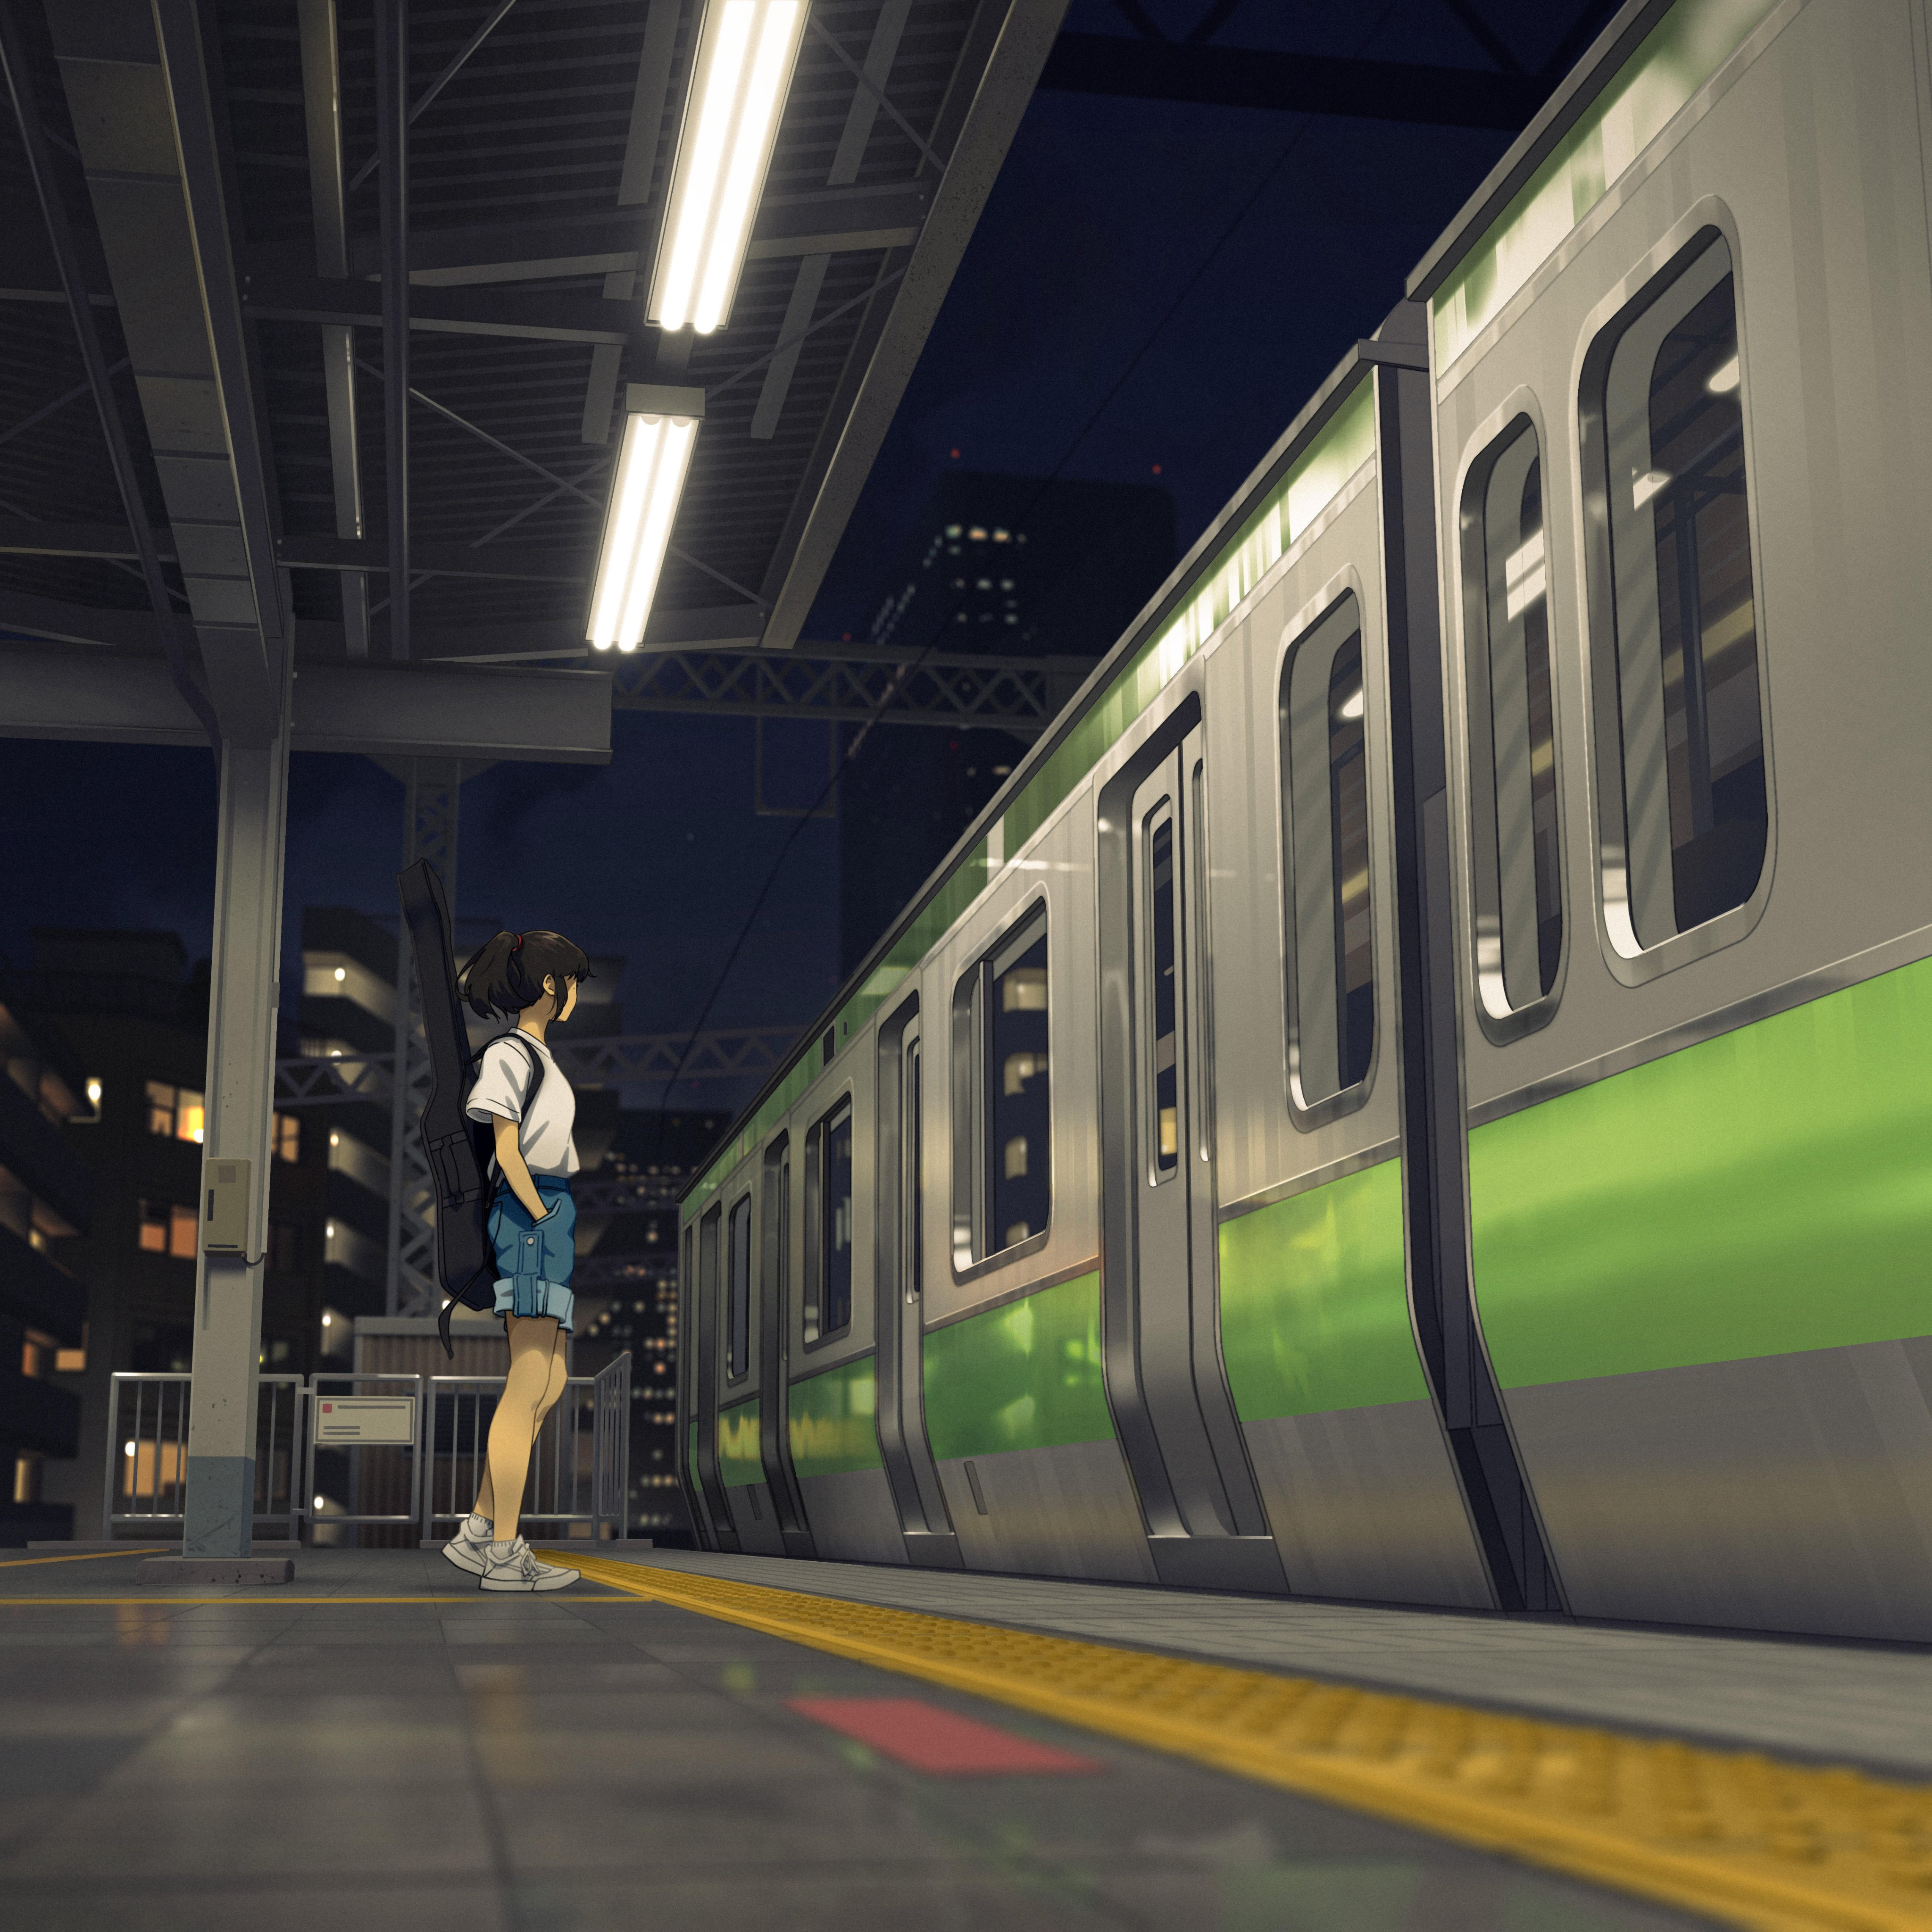 Train Station  Anime  Other  Anime Background Wallpapers on Desktop  Nexus Image 482591